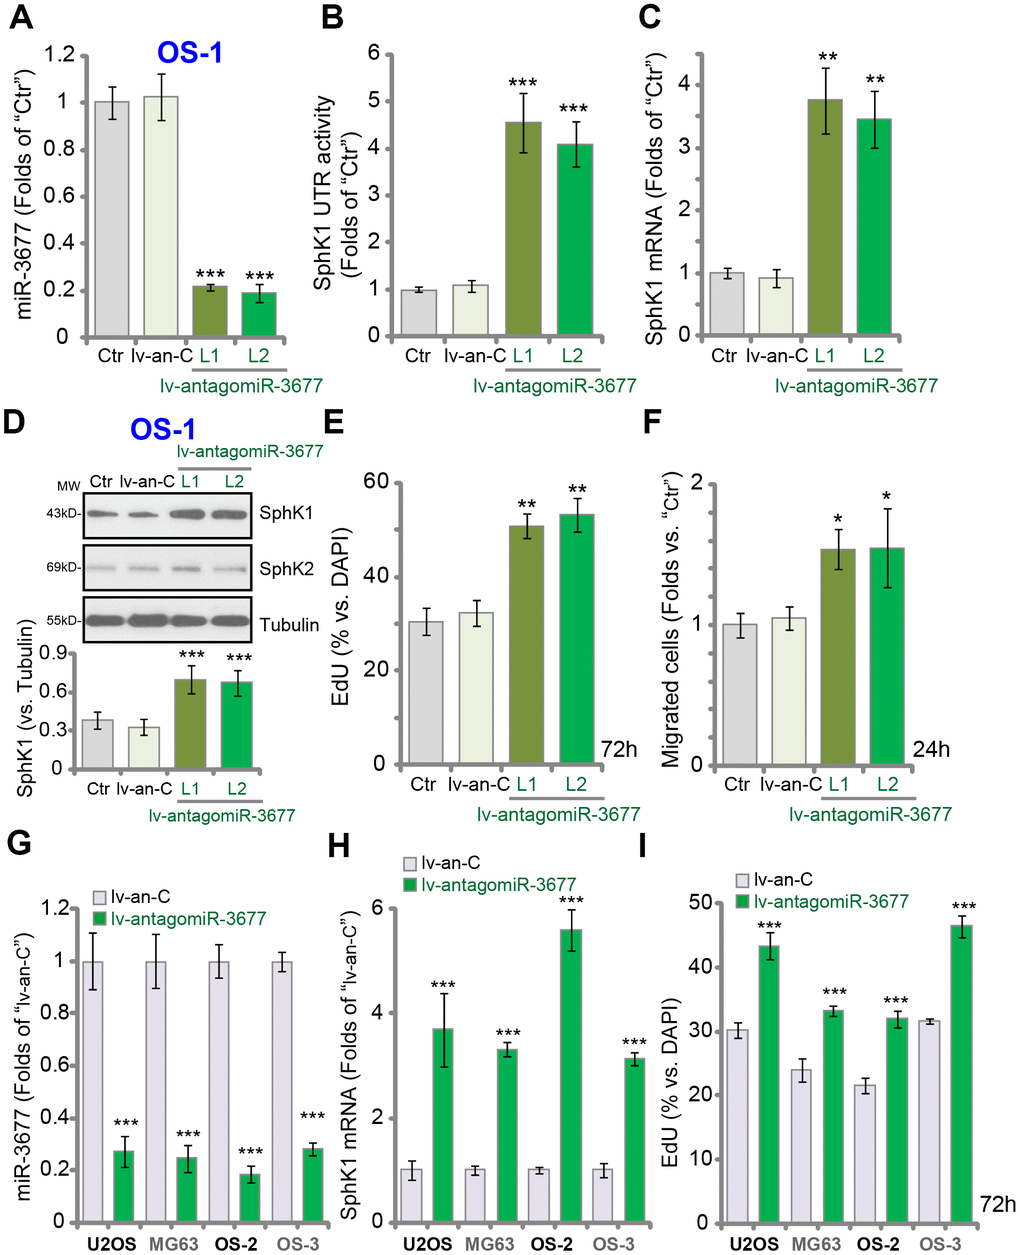 Forced inhibition increases SphK1 expression, promoting OS cell progression in vitro. Expression of listed genes in parental control OS-1 cells (“Ctr”), OS-1 cells with pre-miR-3677 anti-sense lentivirus (“lv-antagomiR-3677”, L1/ L2, two lines) or non-sense anti-sense construct (“lv-an-C”), was tested by qPCR (A and C) and Western blotting (D) assays, with the relative SphK1 3’-UTR activity examined (B); Cell proliferation and migration were tested by EdU incorporation (E) and “Transwell” (F) assays, respectively. The listed OS cells were infected with lv-antagomiR-3677 or lv-an-C for 48h, expression of mature miR-3677 (-3p, G) and SphK1 mRNA (H) was tested, with cell proliferation examined by EdU incorporation assays (I). Expression of listed proteins was quantified, normalized to the loading control Tubulin (G). Data were presented as mean ± SD (n=5), and results were normalized. ***P